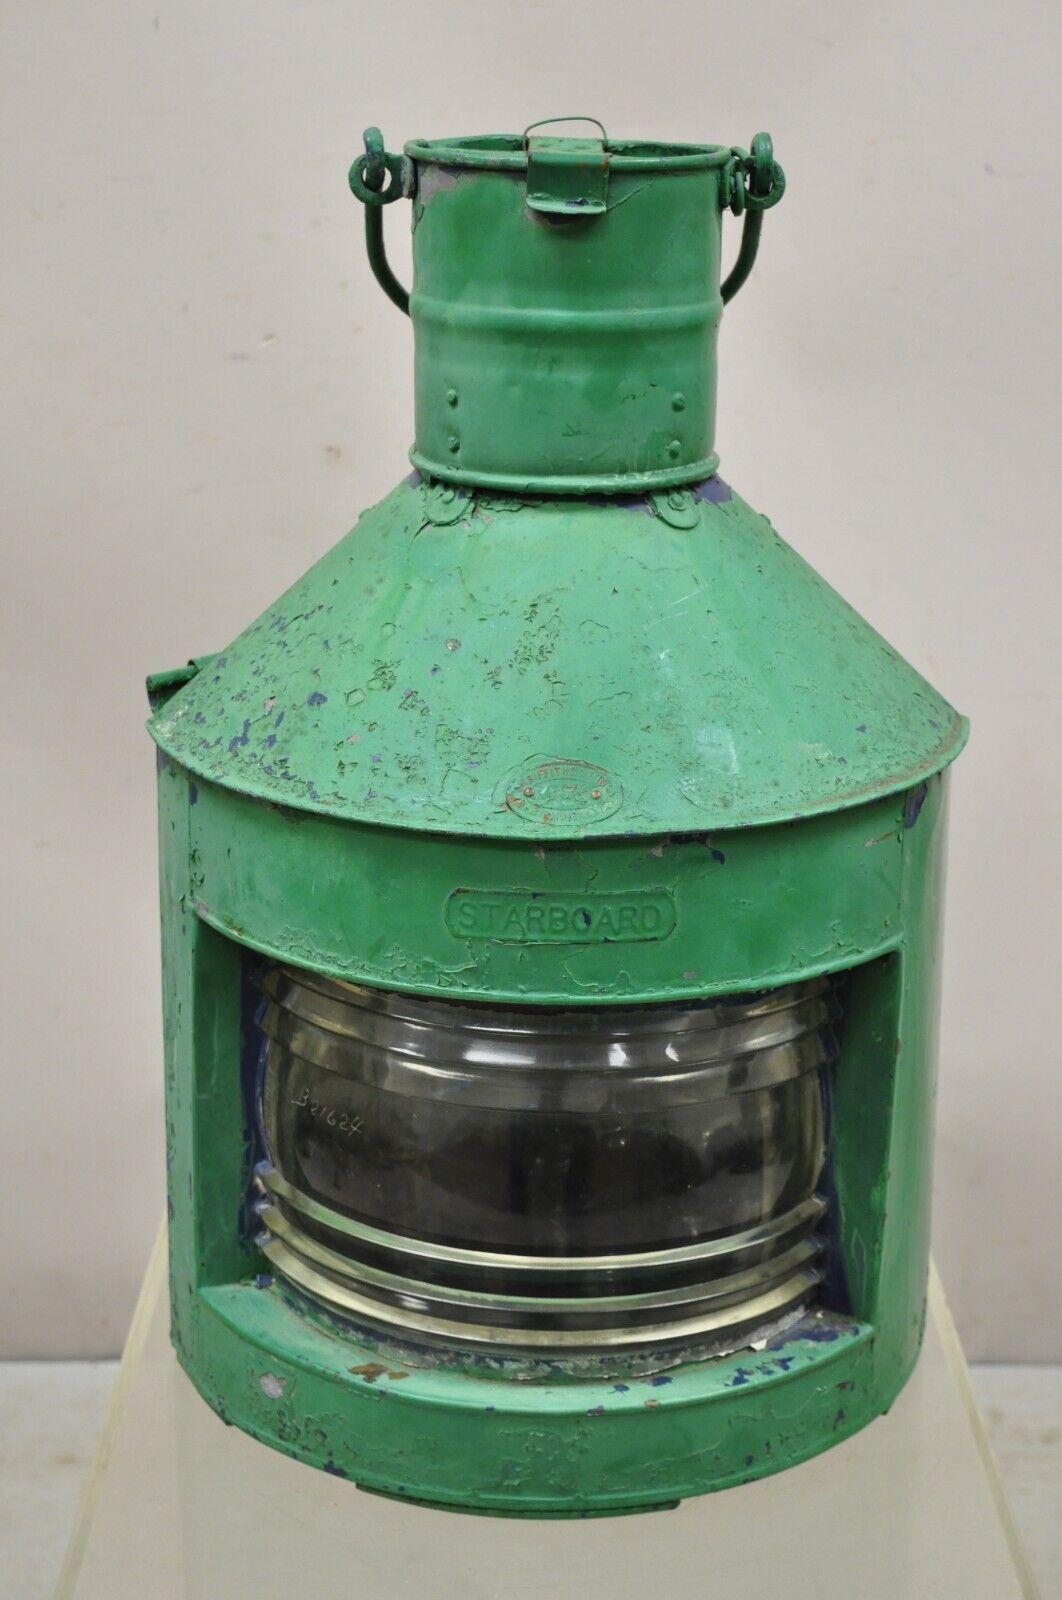 Antique Eli Griffith & Sons Green Marine Masthead Ship Lantern Fixture. Item features green painted finish, blue reflector, original tag, very nice antique item, great style and form. Circa Early 1900s Measurements: 23